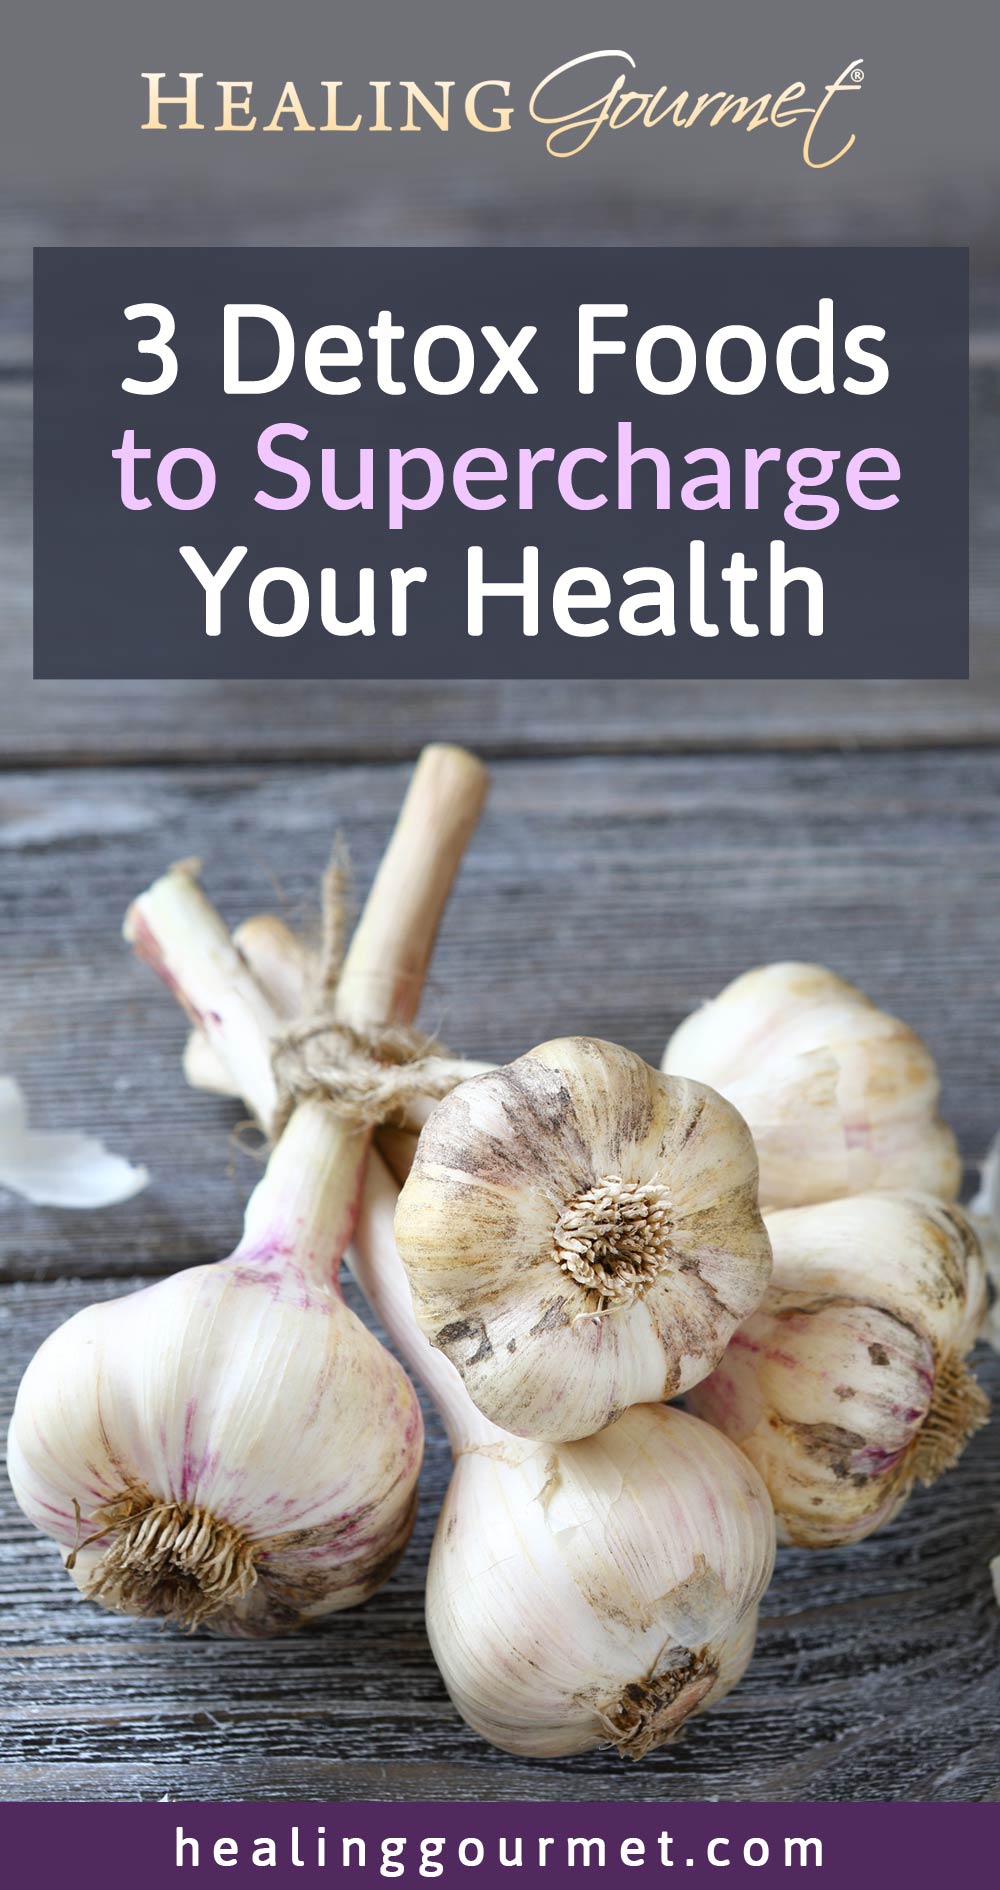 3 Detox Foods to Supercharge Your Health